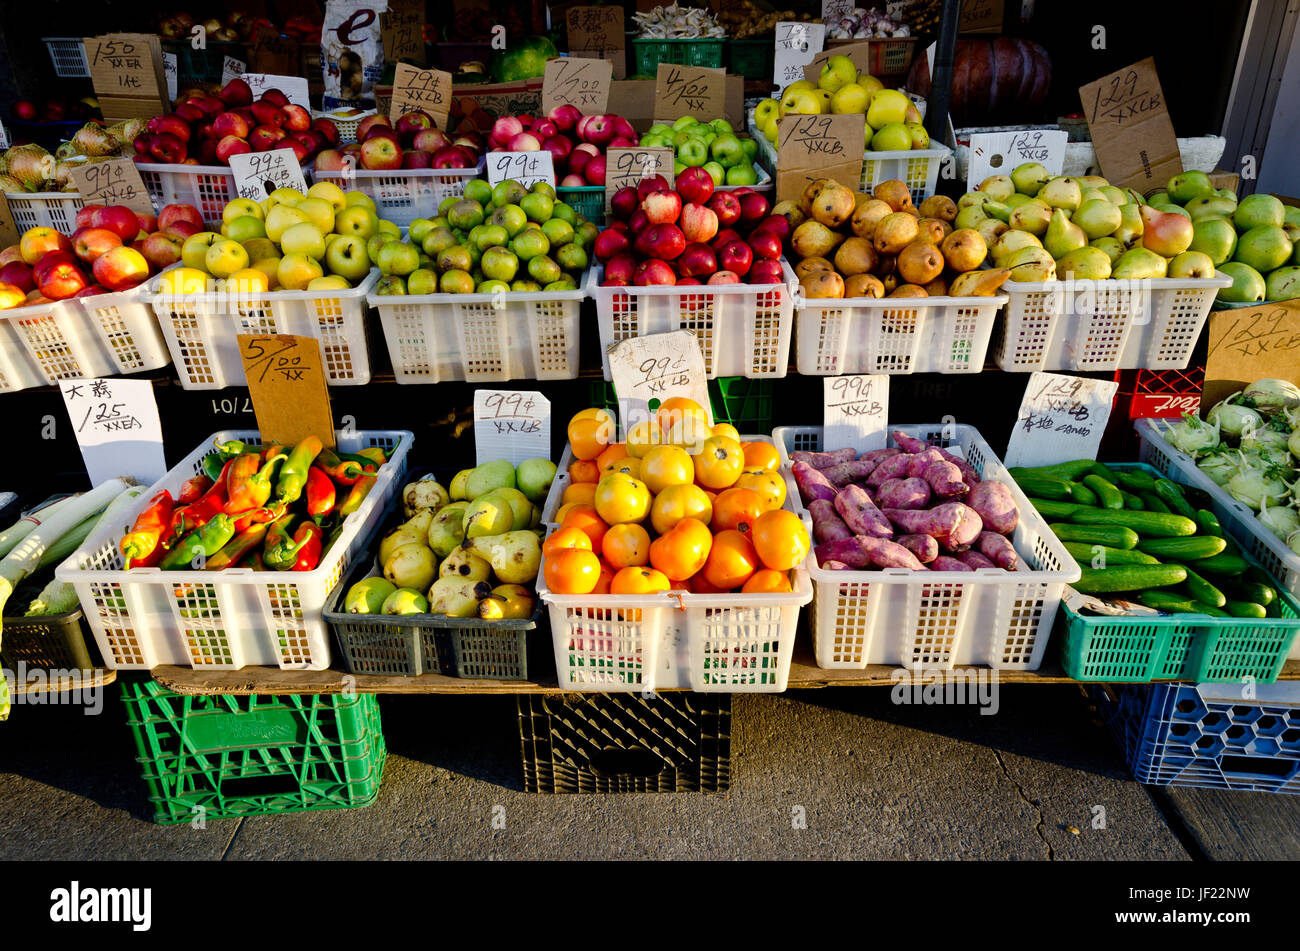 Oriental green grocer's outdoor stall showing various fruits and vegetables  in the late afternoon sun Stock Photo